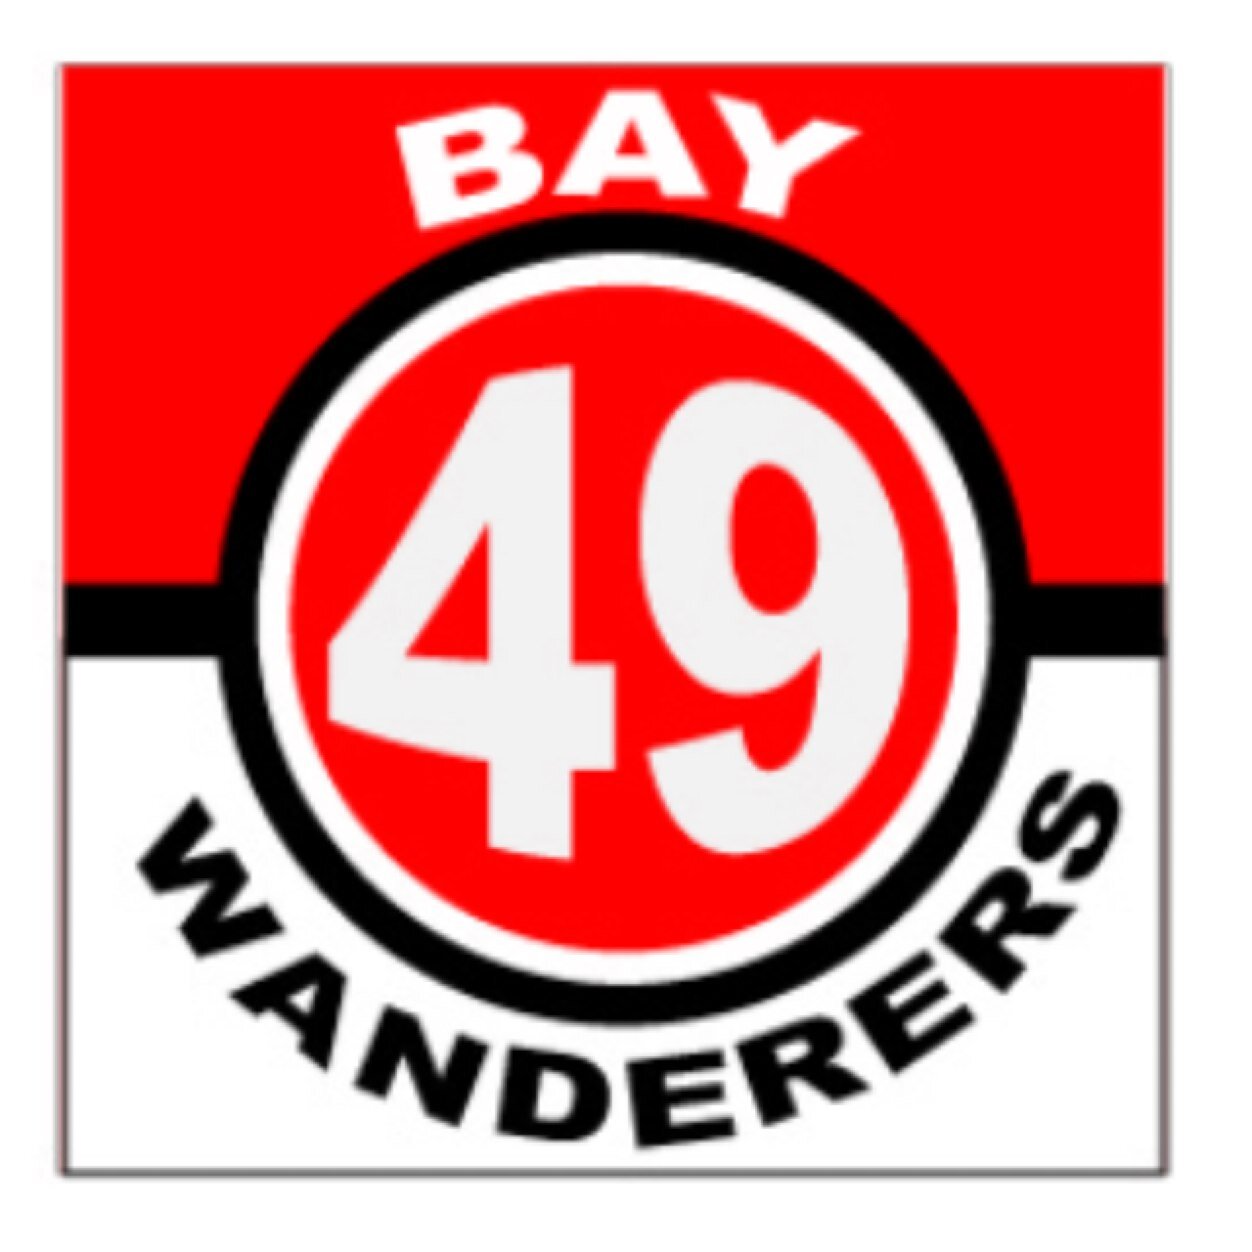 Wanderers is our club BAY 49 is our family follow us!